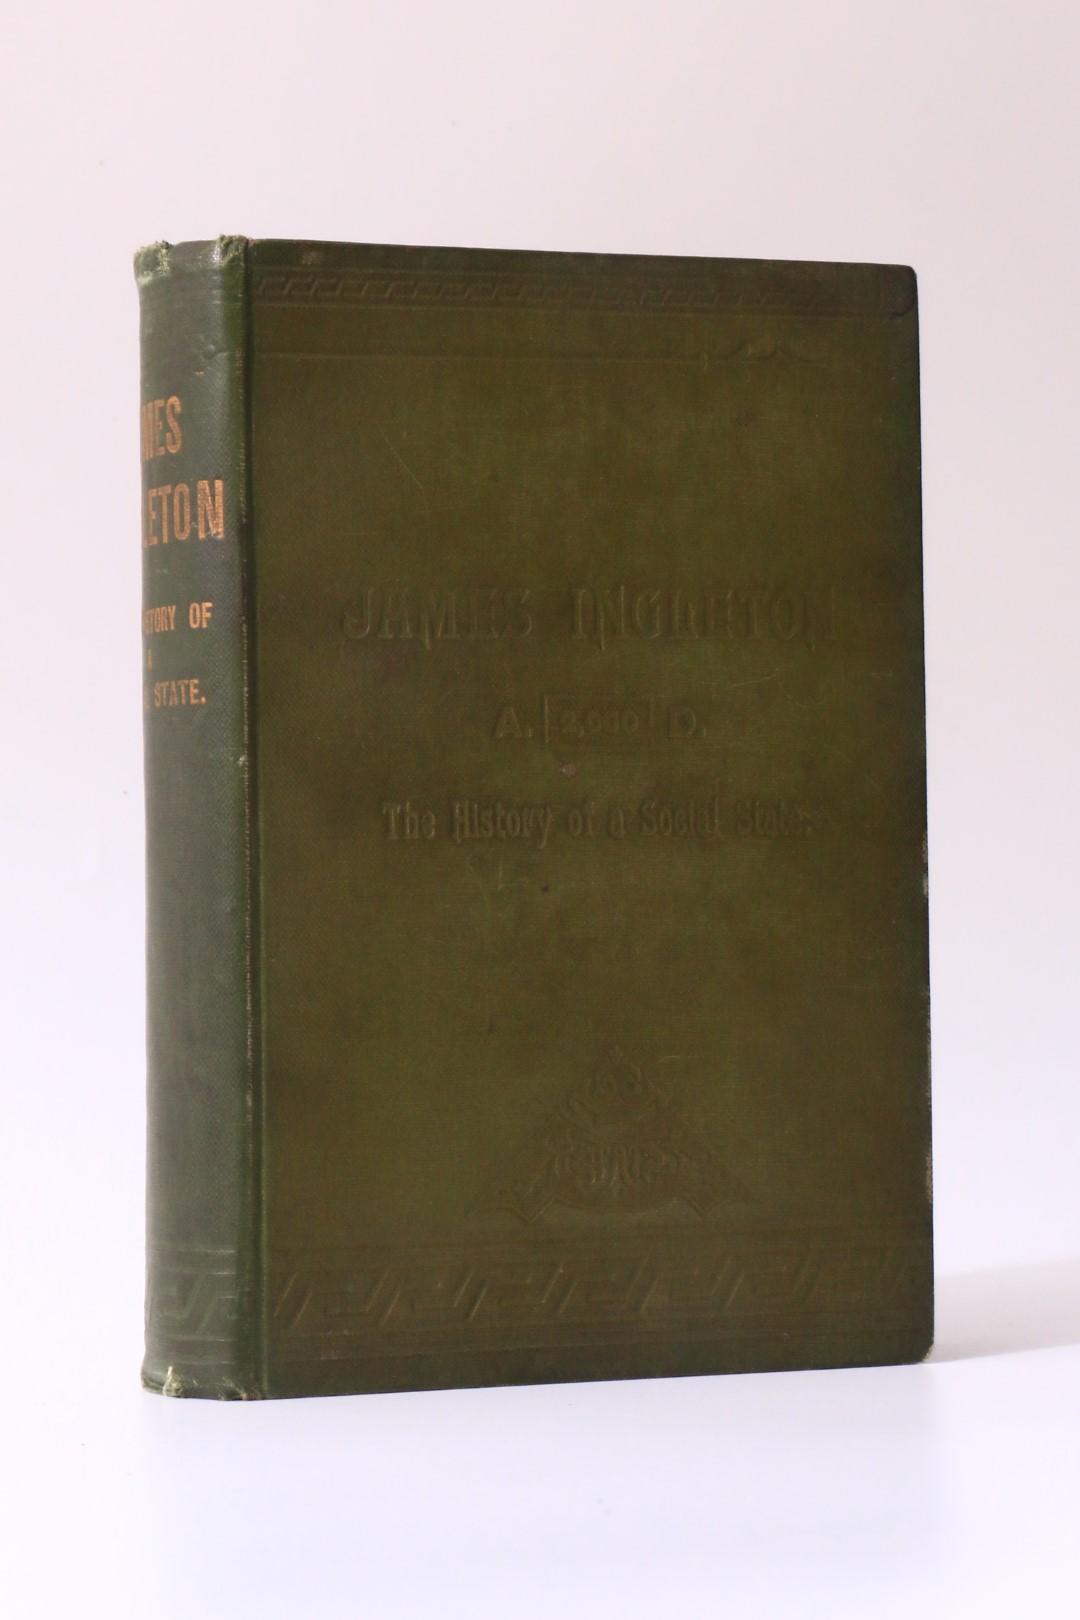 Mr. Dick - James Ingleton: The History of a Social State: 2000AD. - James Blackwood, n.d. [1893], First Edition.